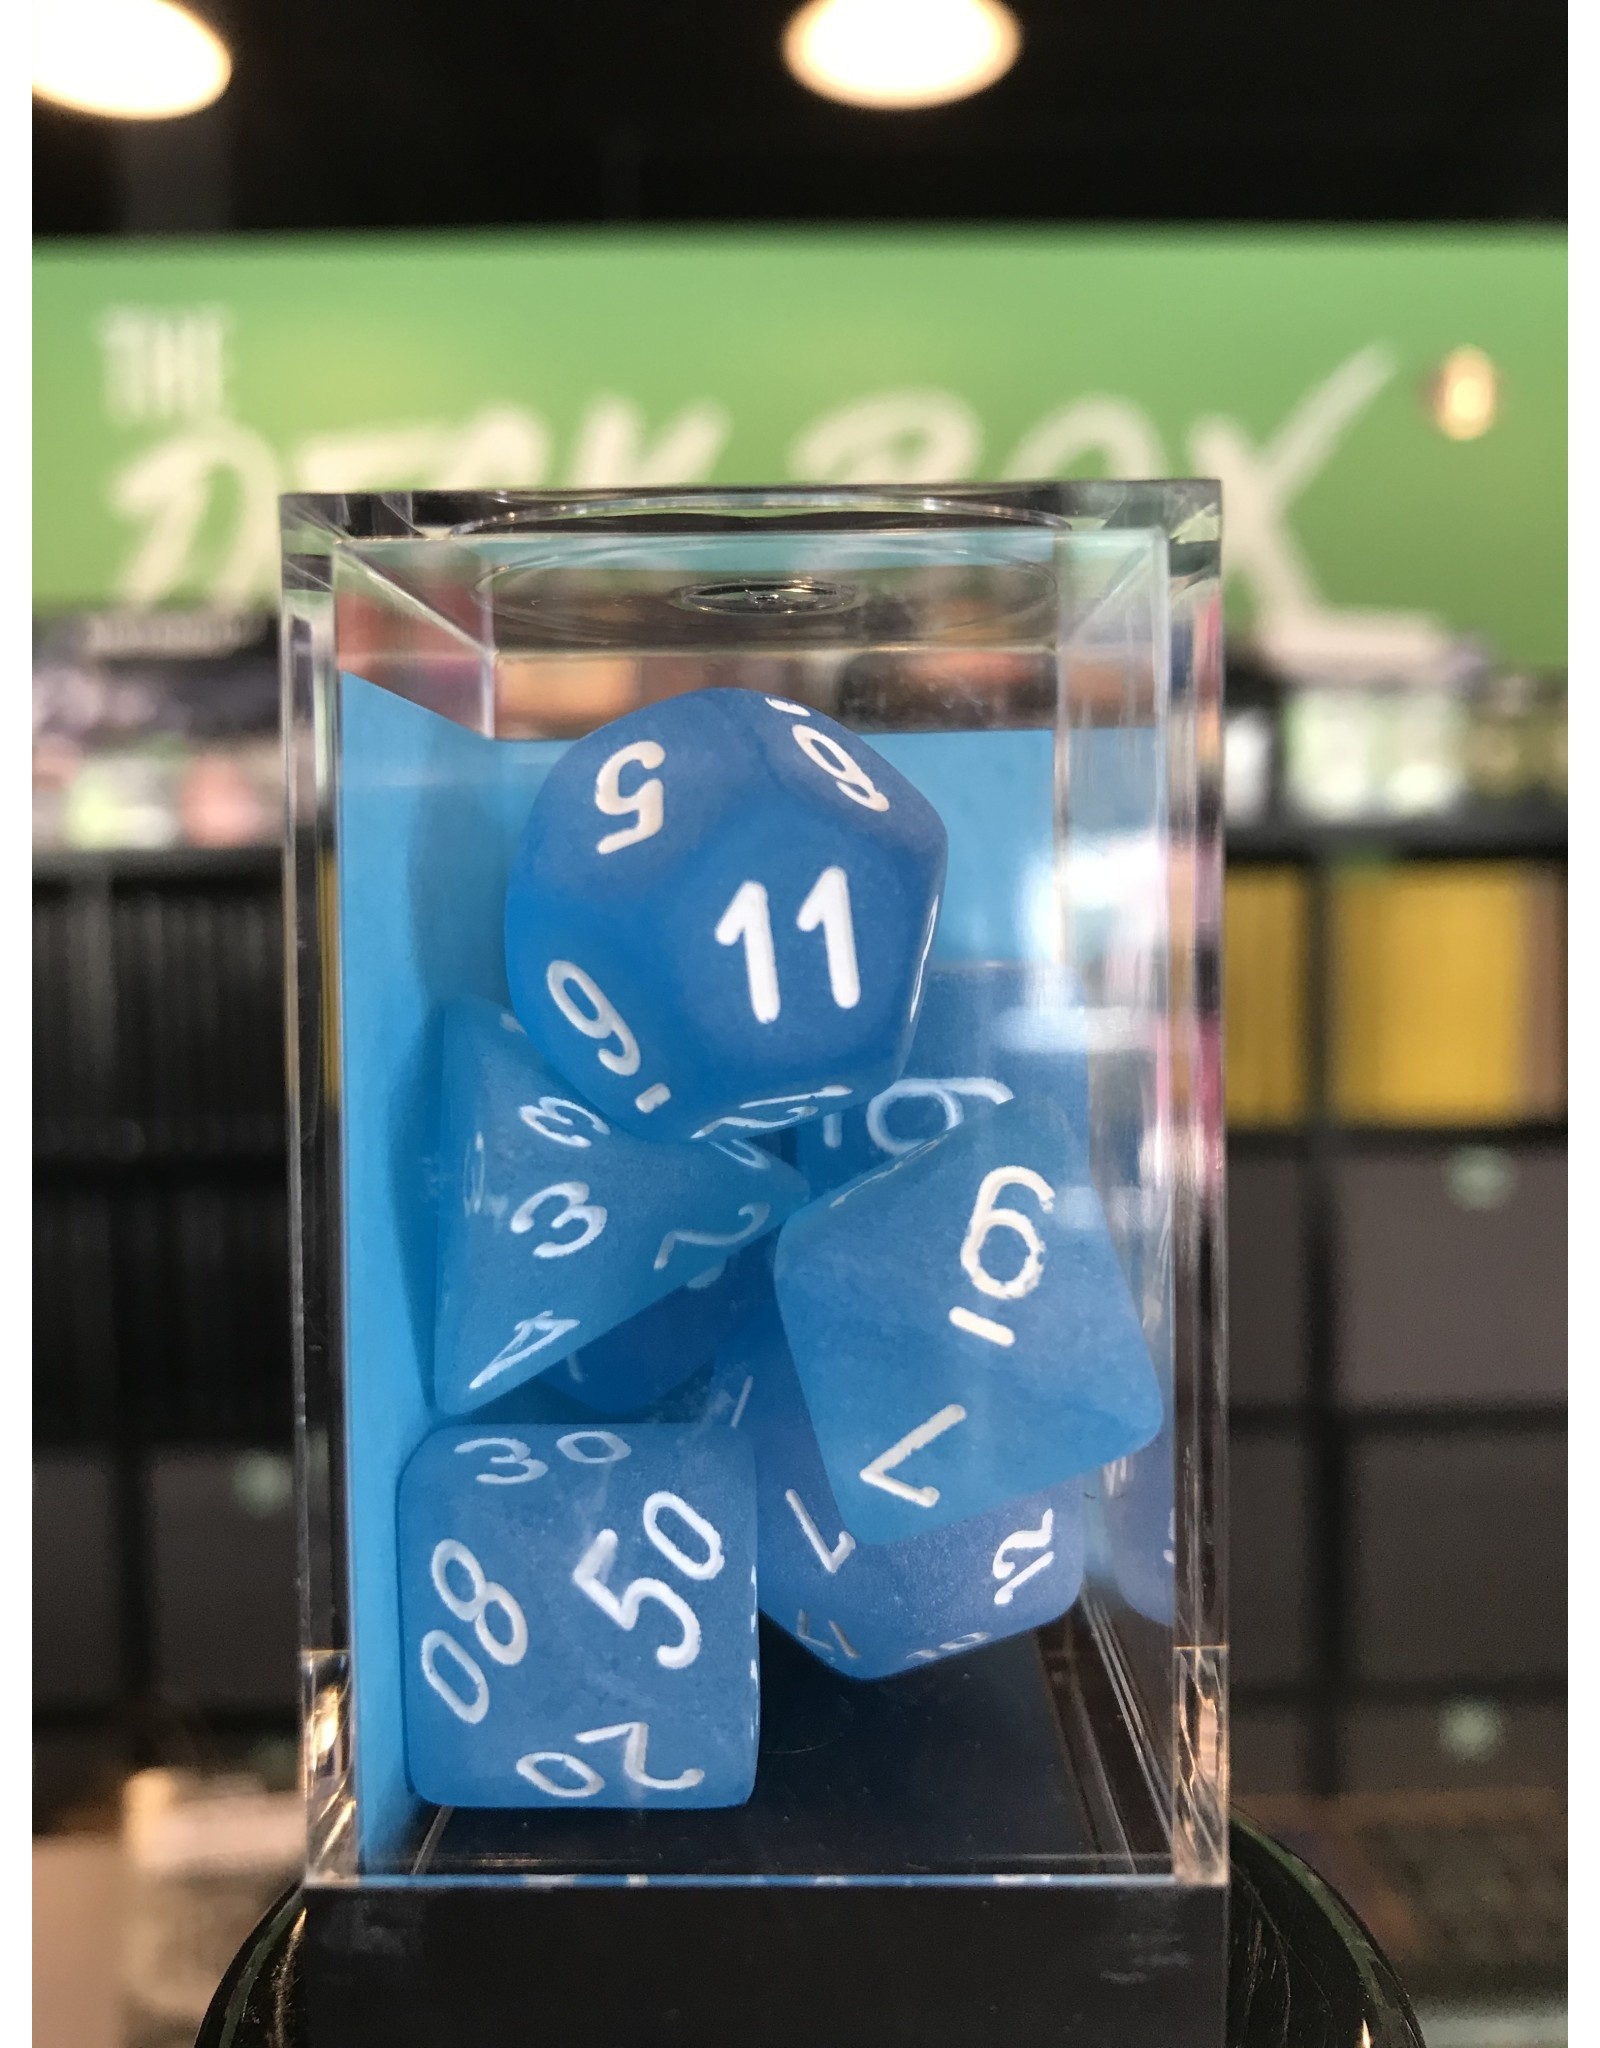 7- Dice Set FROSTED 7-DIE SET CARIBBEAN BLUE/WHITE